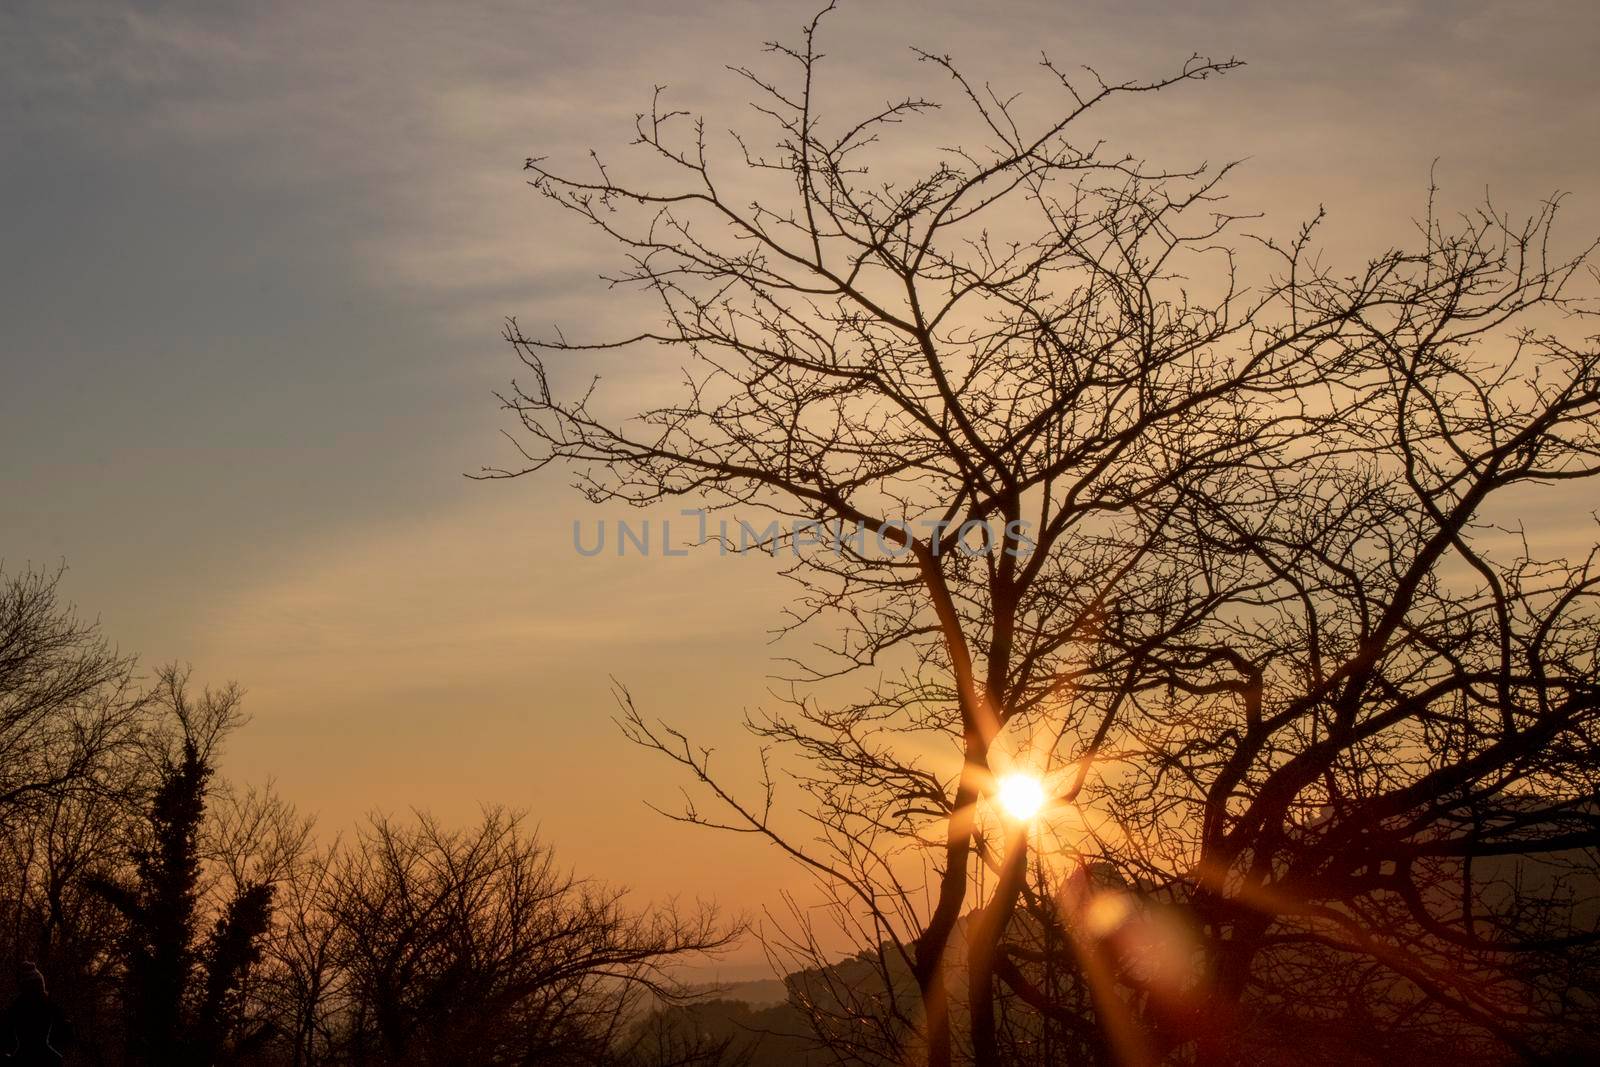 Sunset tree silhouette in the countryside by ValentimePix